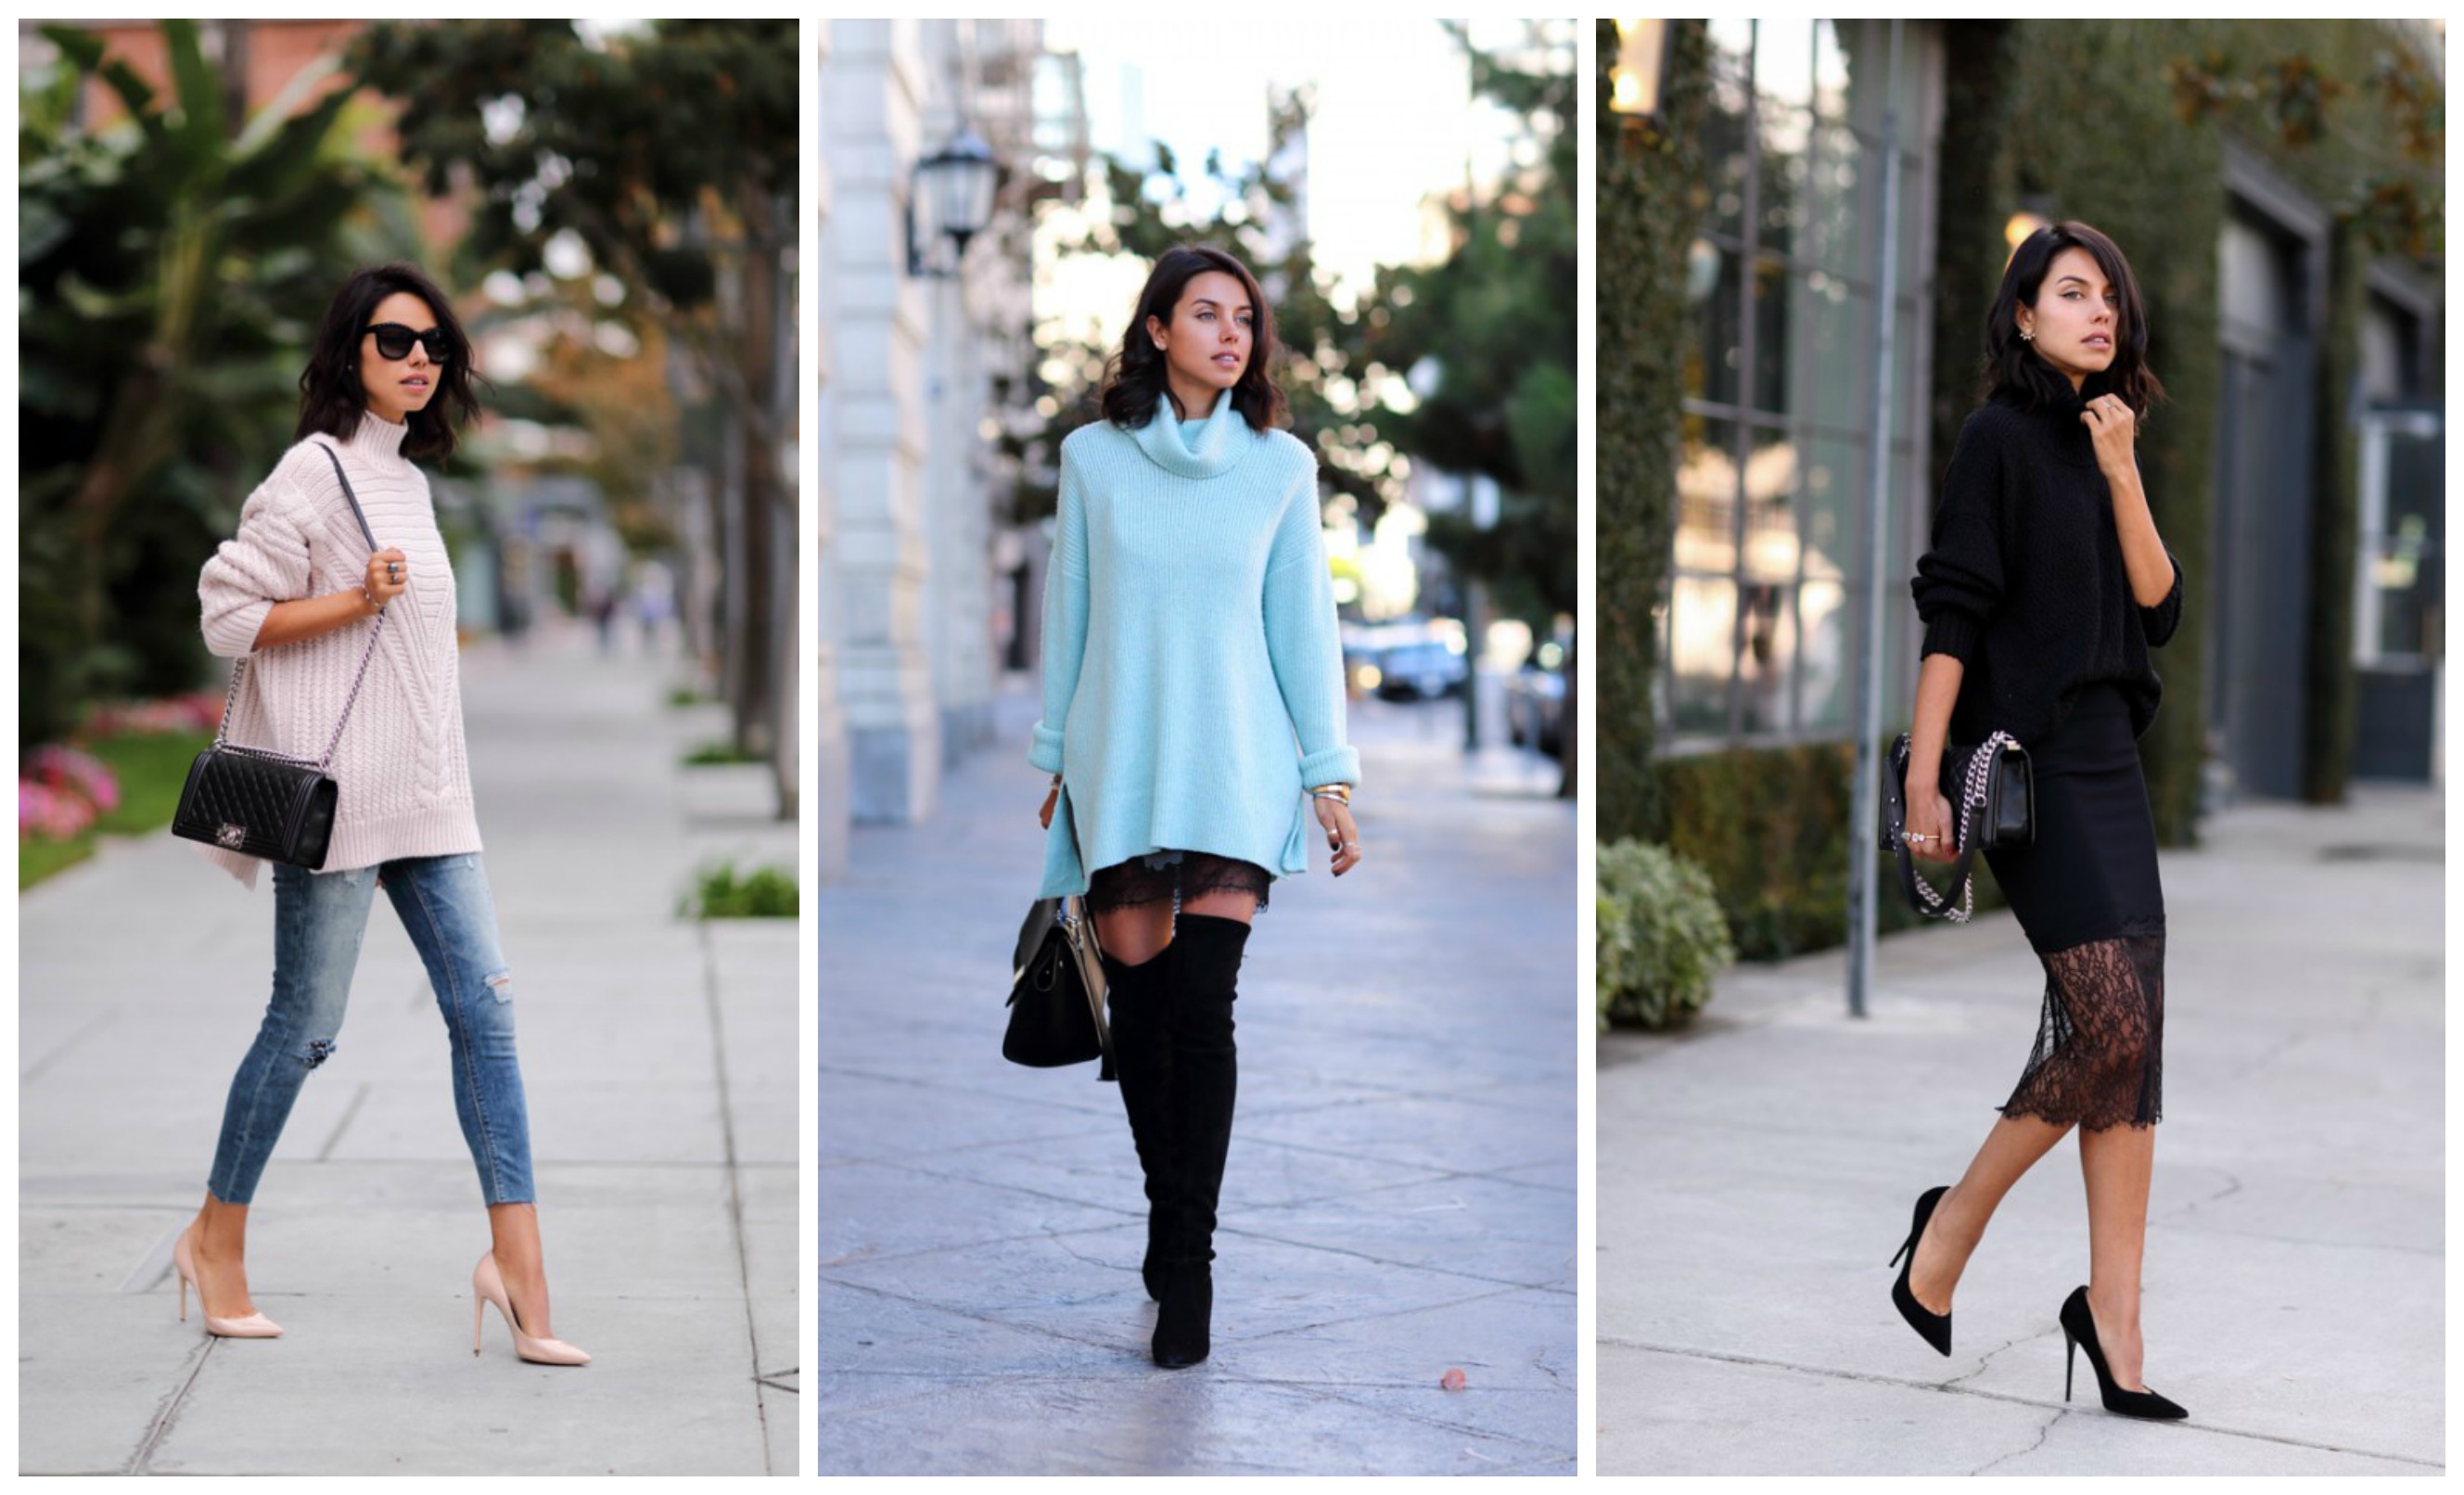 How to Look Chic in a Turtleneck Sweater - fashionsy.com